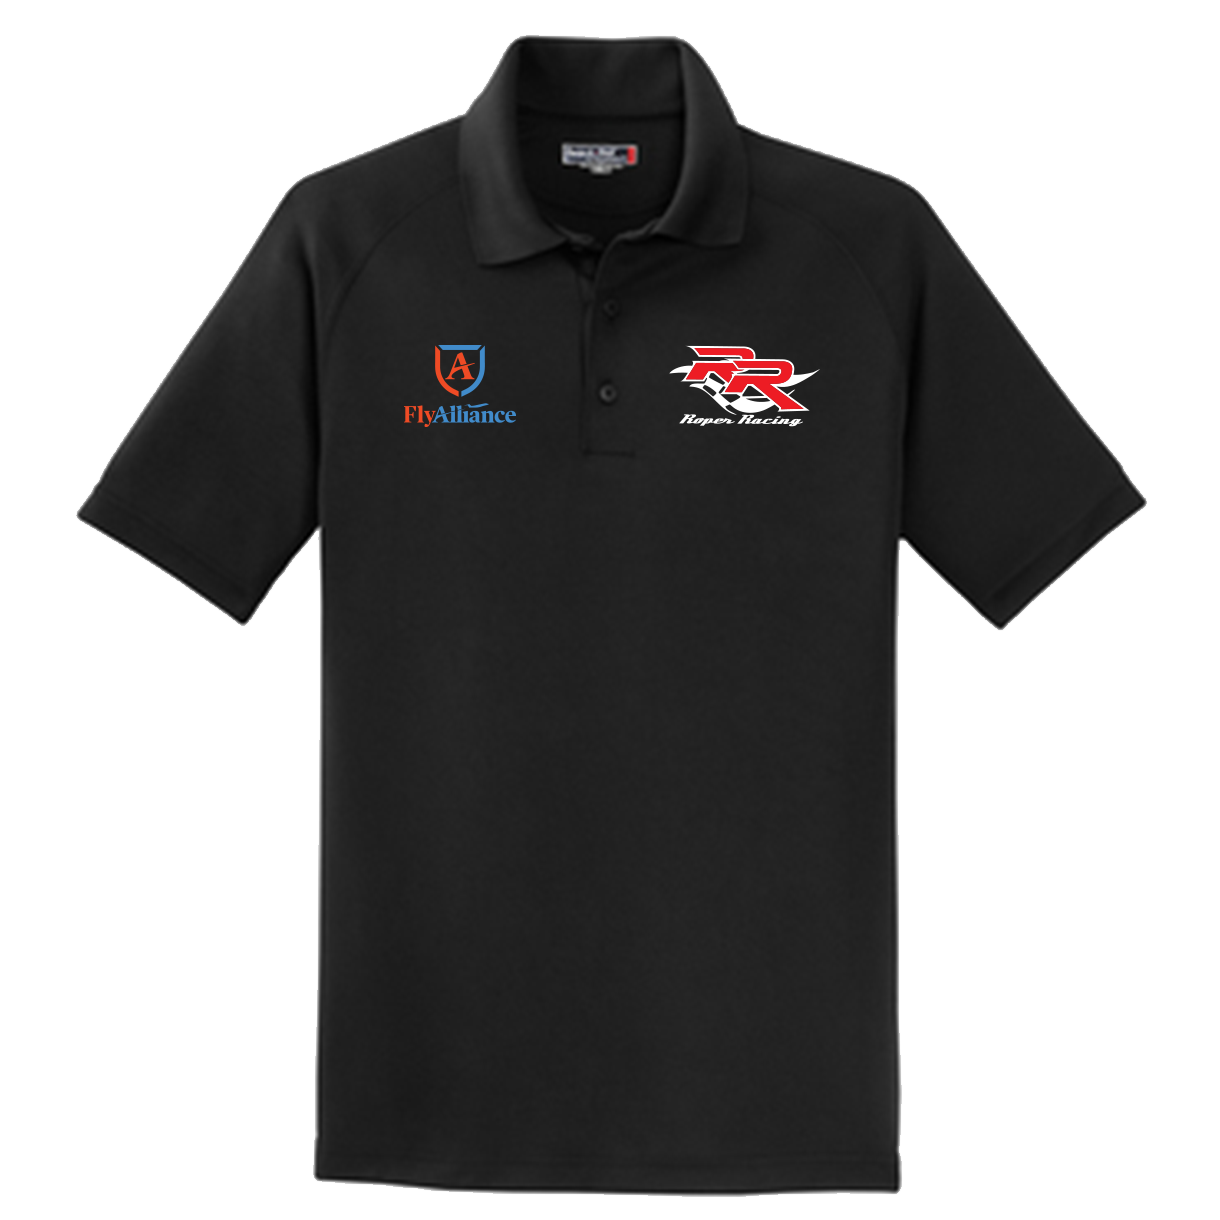 Roper Racing Fly Alliance Embroidered Polo Shirt